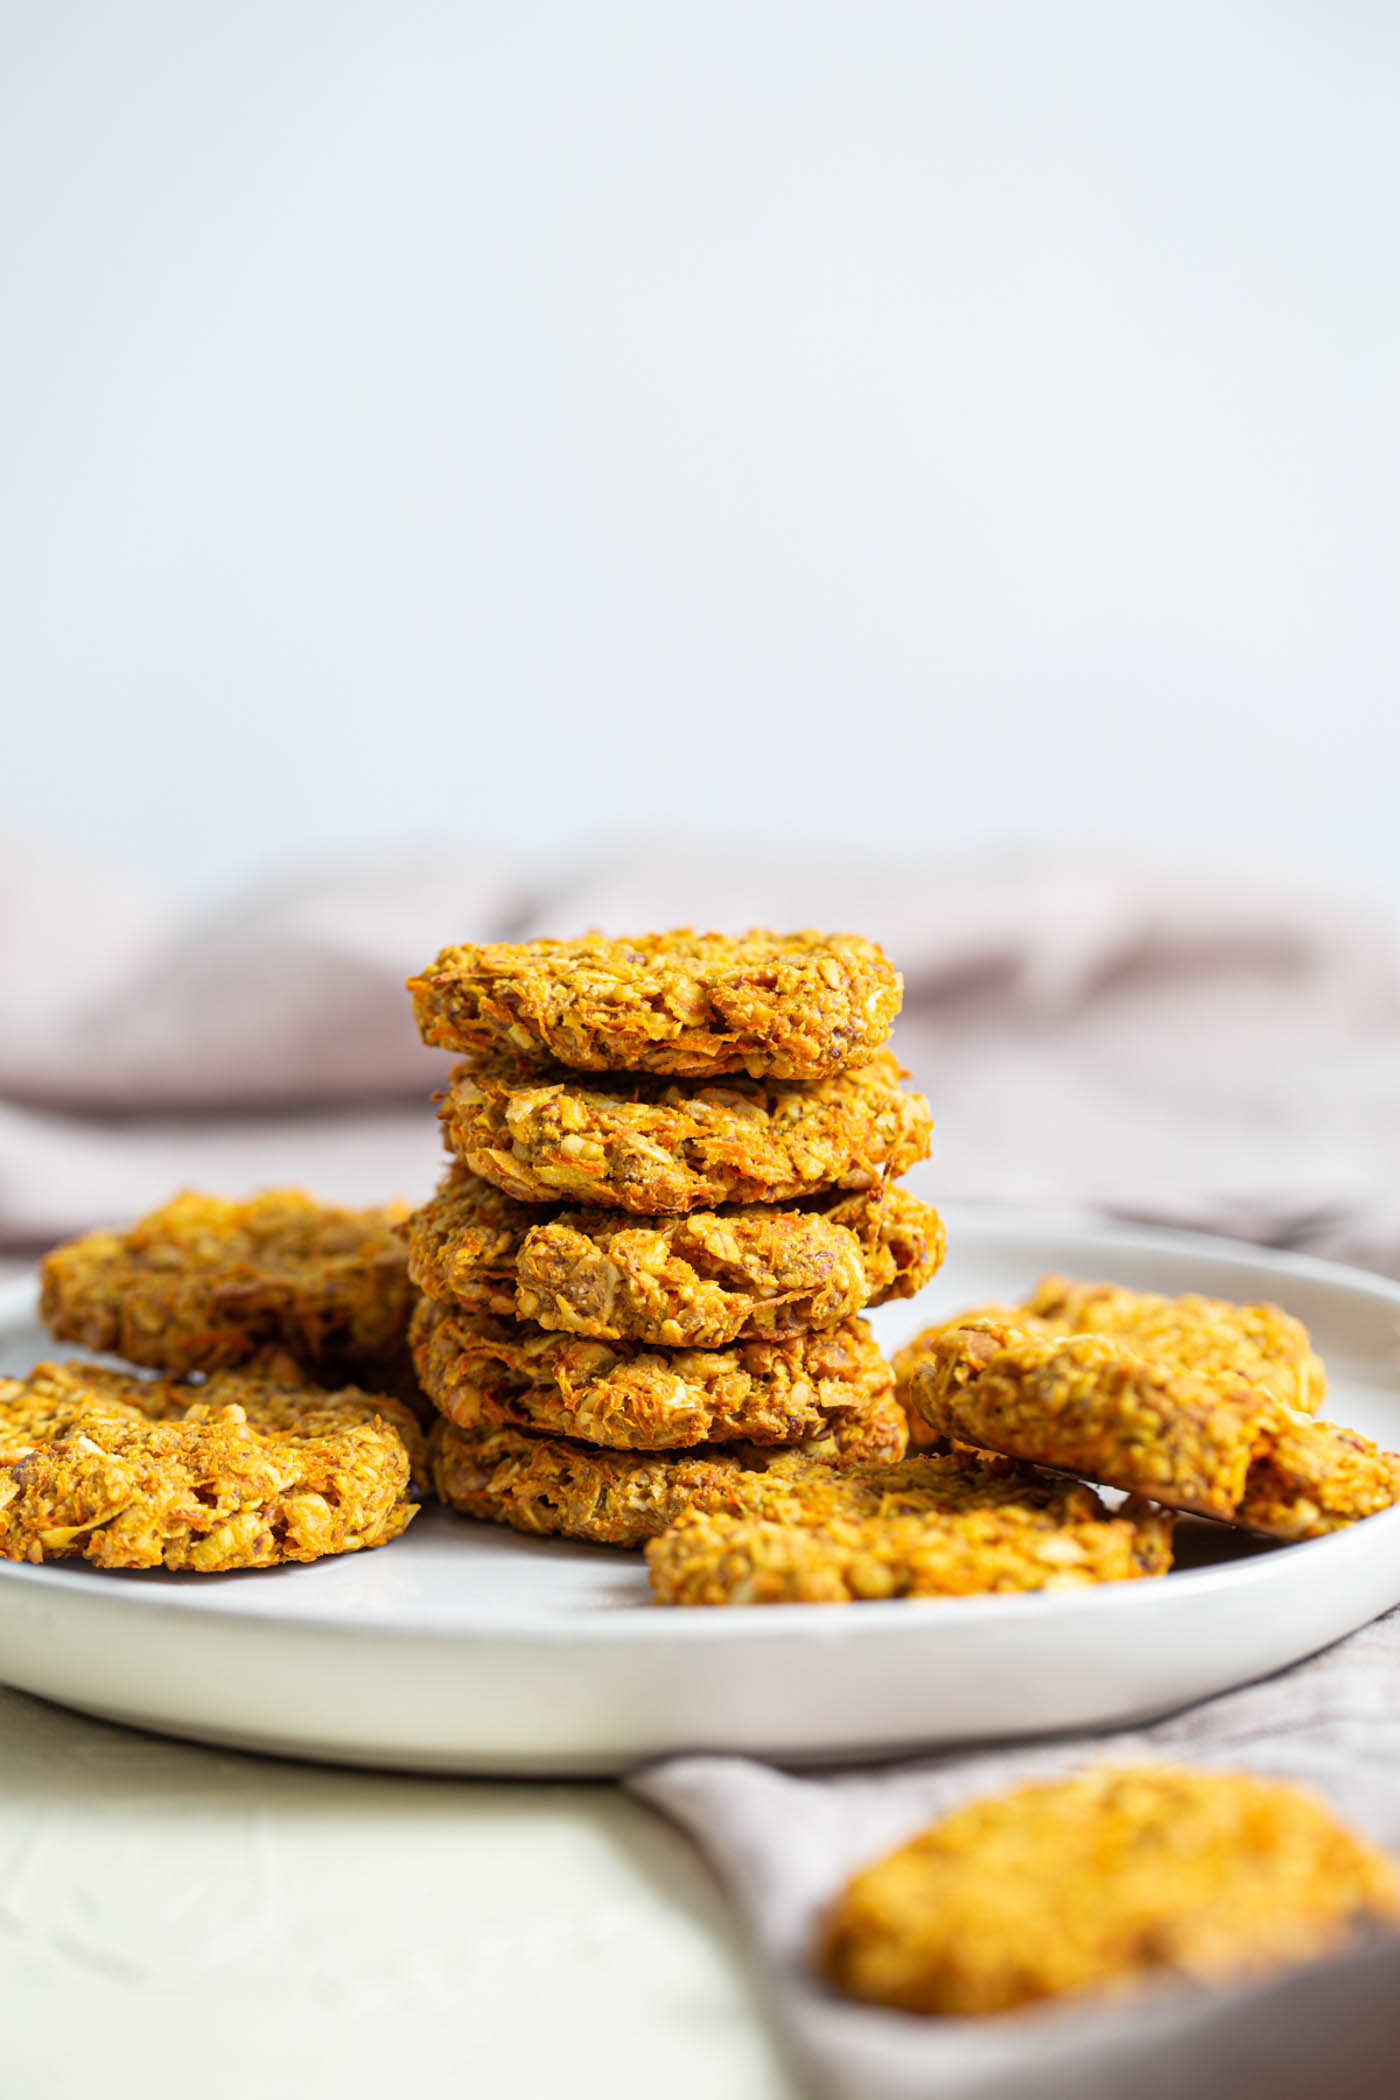 Vegan Turmeric Carrot Oatmeal Cookies (sweetened with maple syrup)